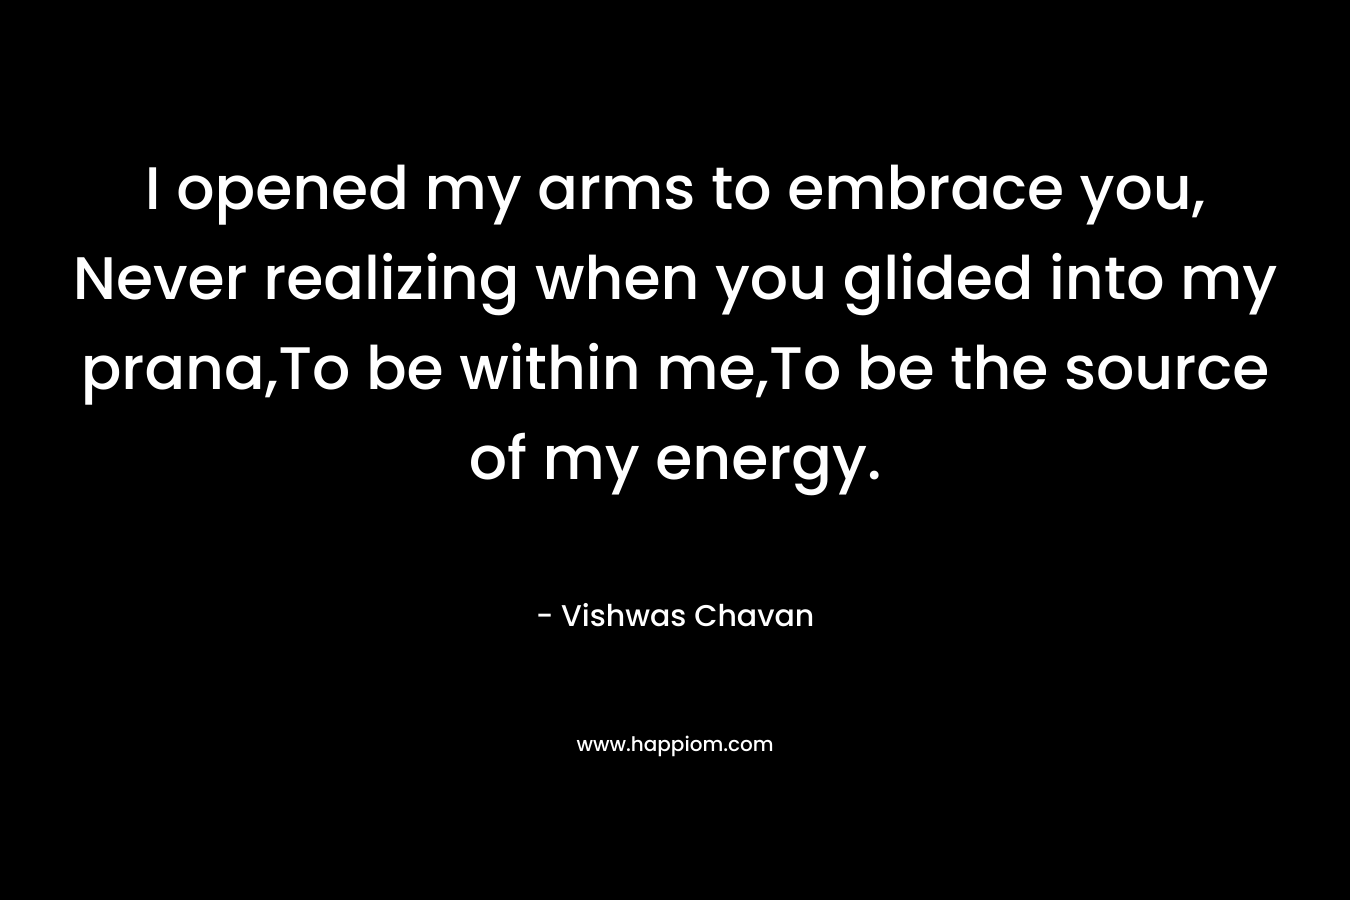 I opened my arms to embrace you, Never realizing when you glided into my prana,To be within me,To be the source of my energy. – Vishwas Chavan